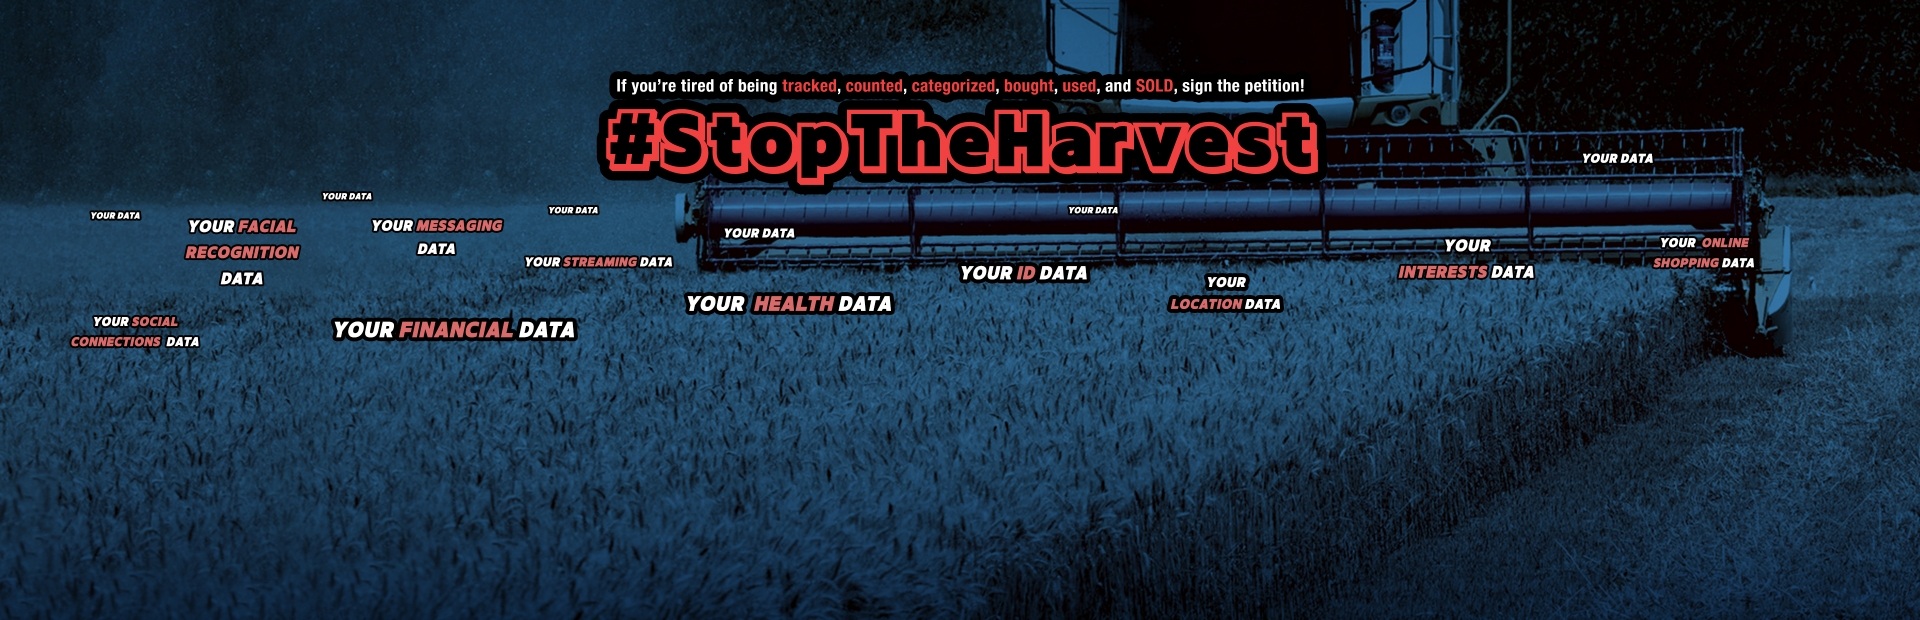 Stop the data harvest!